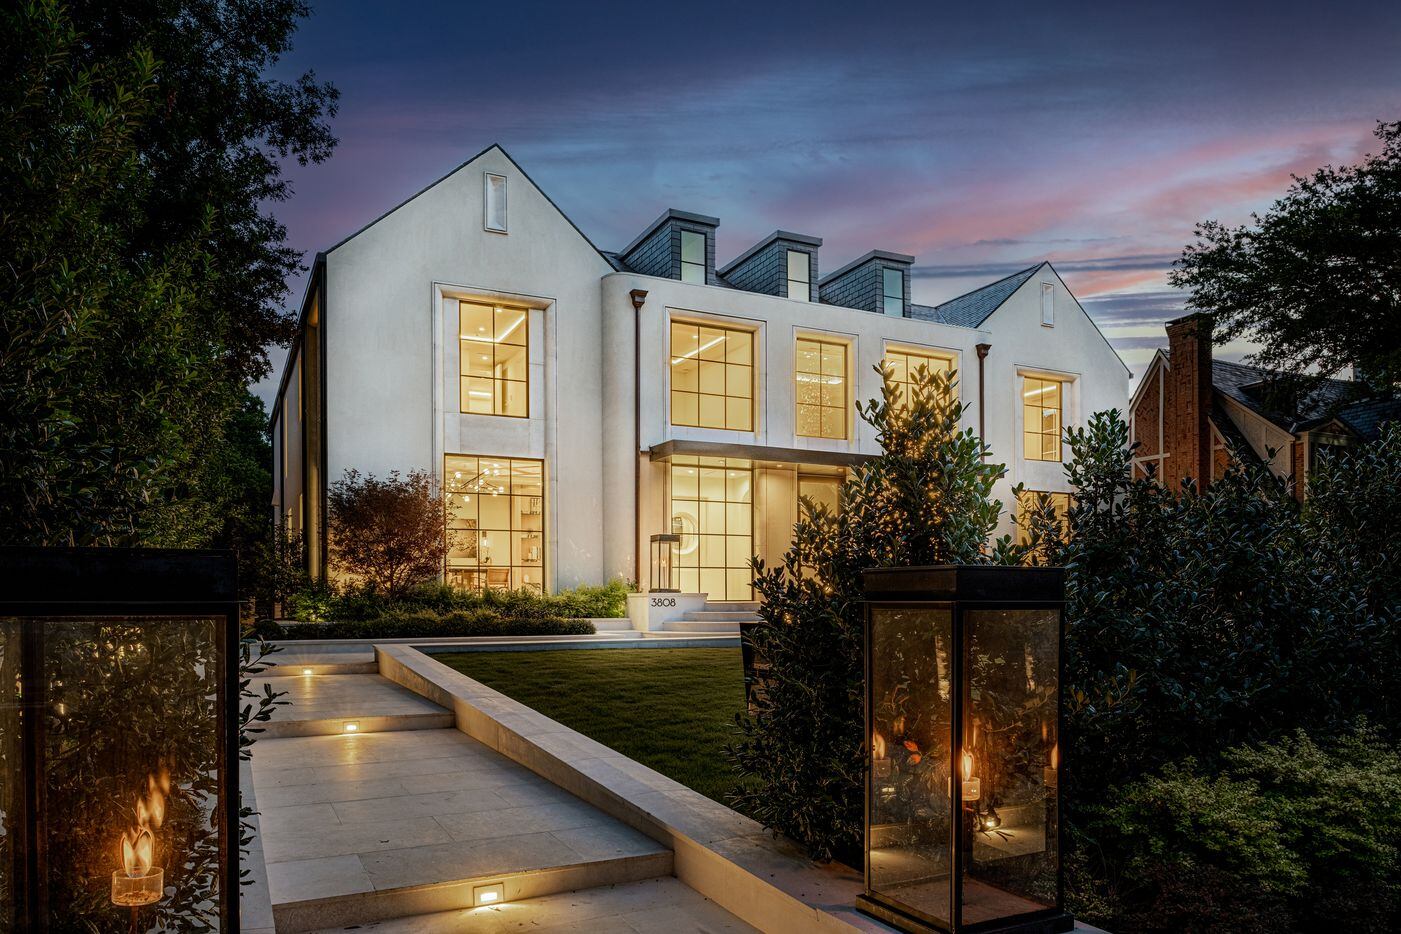 The $18.5 million home on Potomac Avenue was the most expensive home to hit the market in...